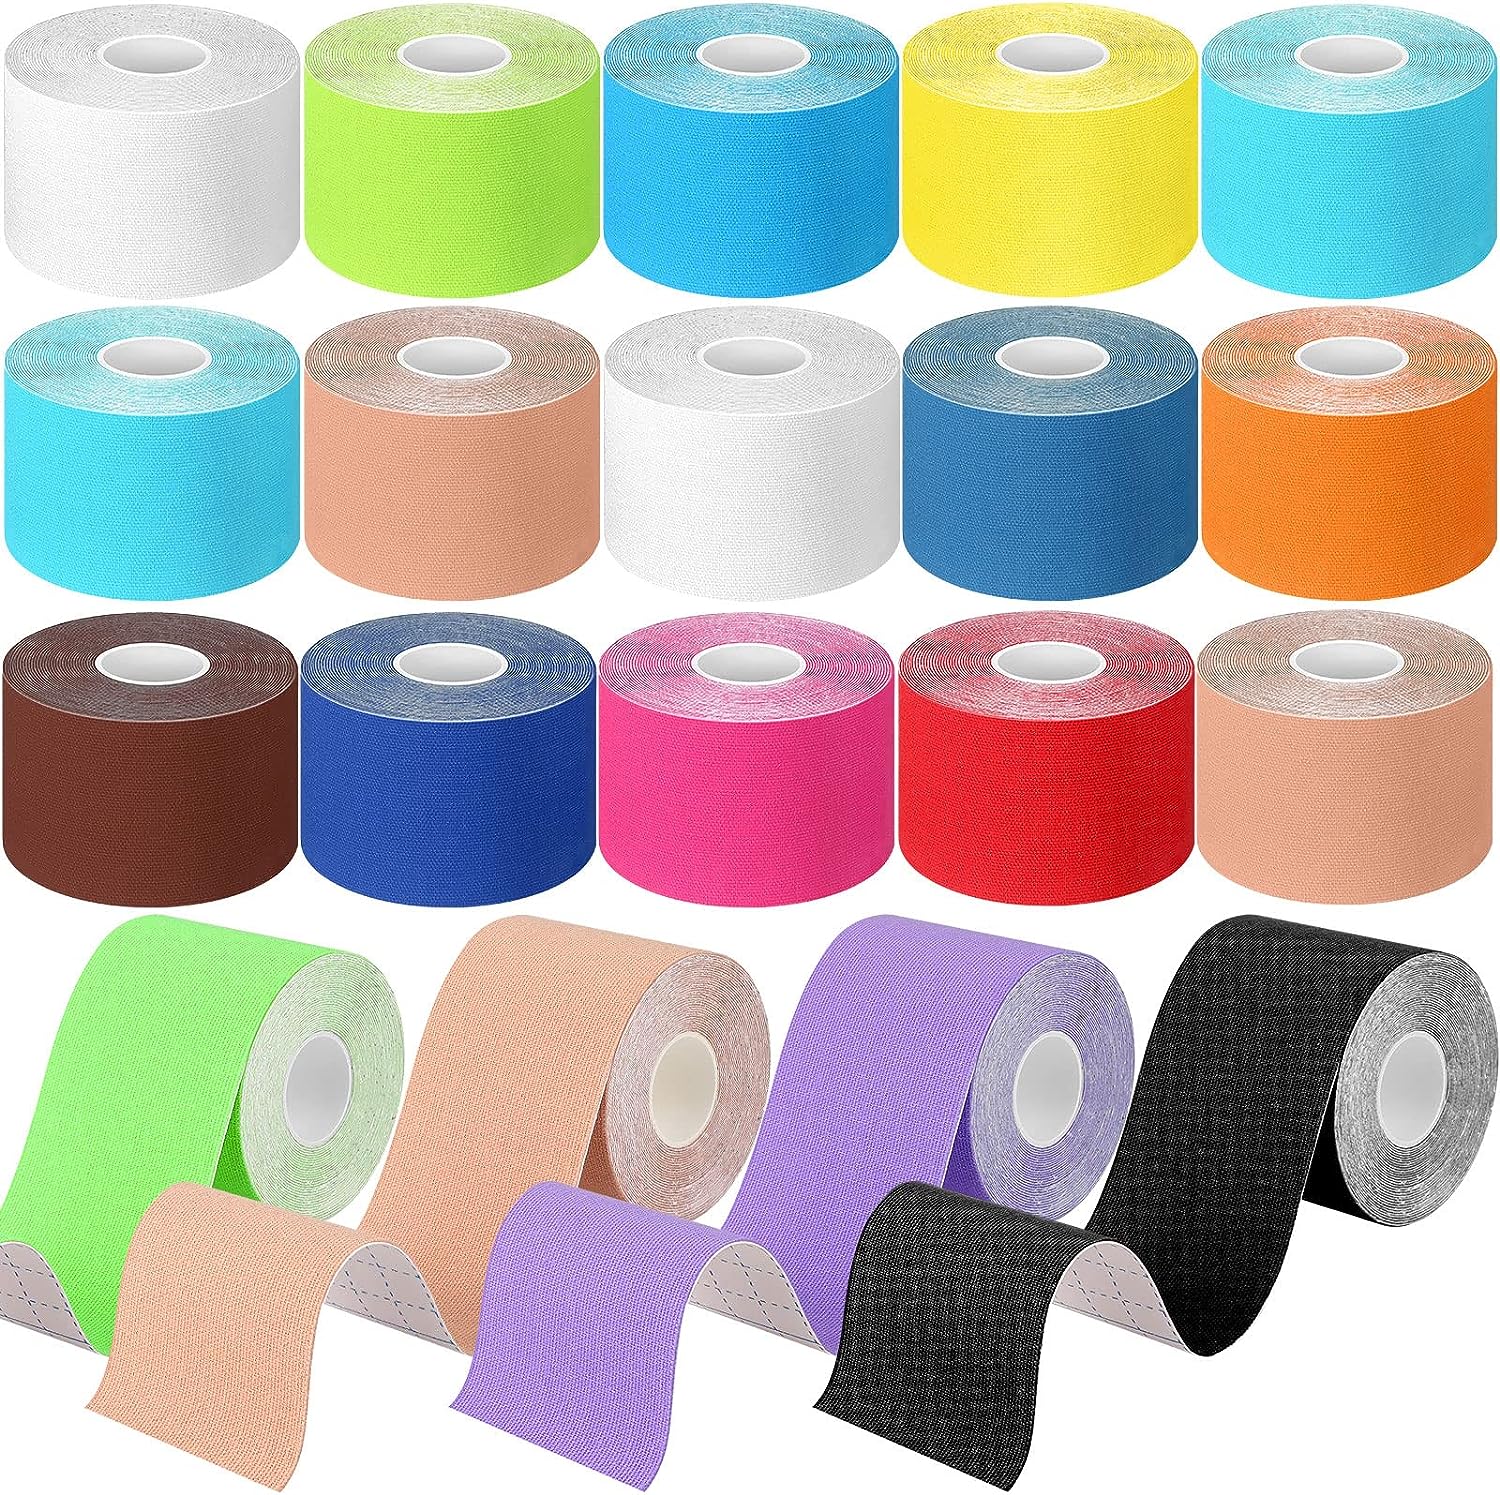 20 Rolls Kinesiology Recovery Tape 2 Inch x 16 ft [...]